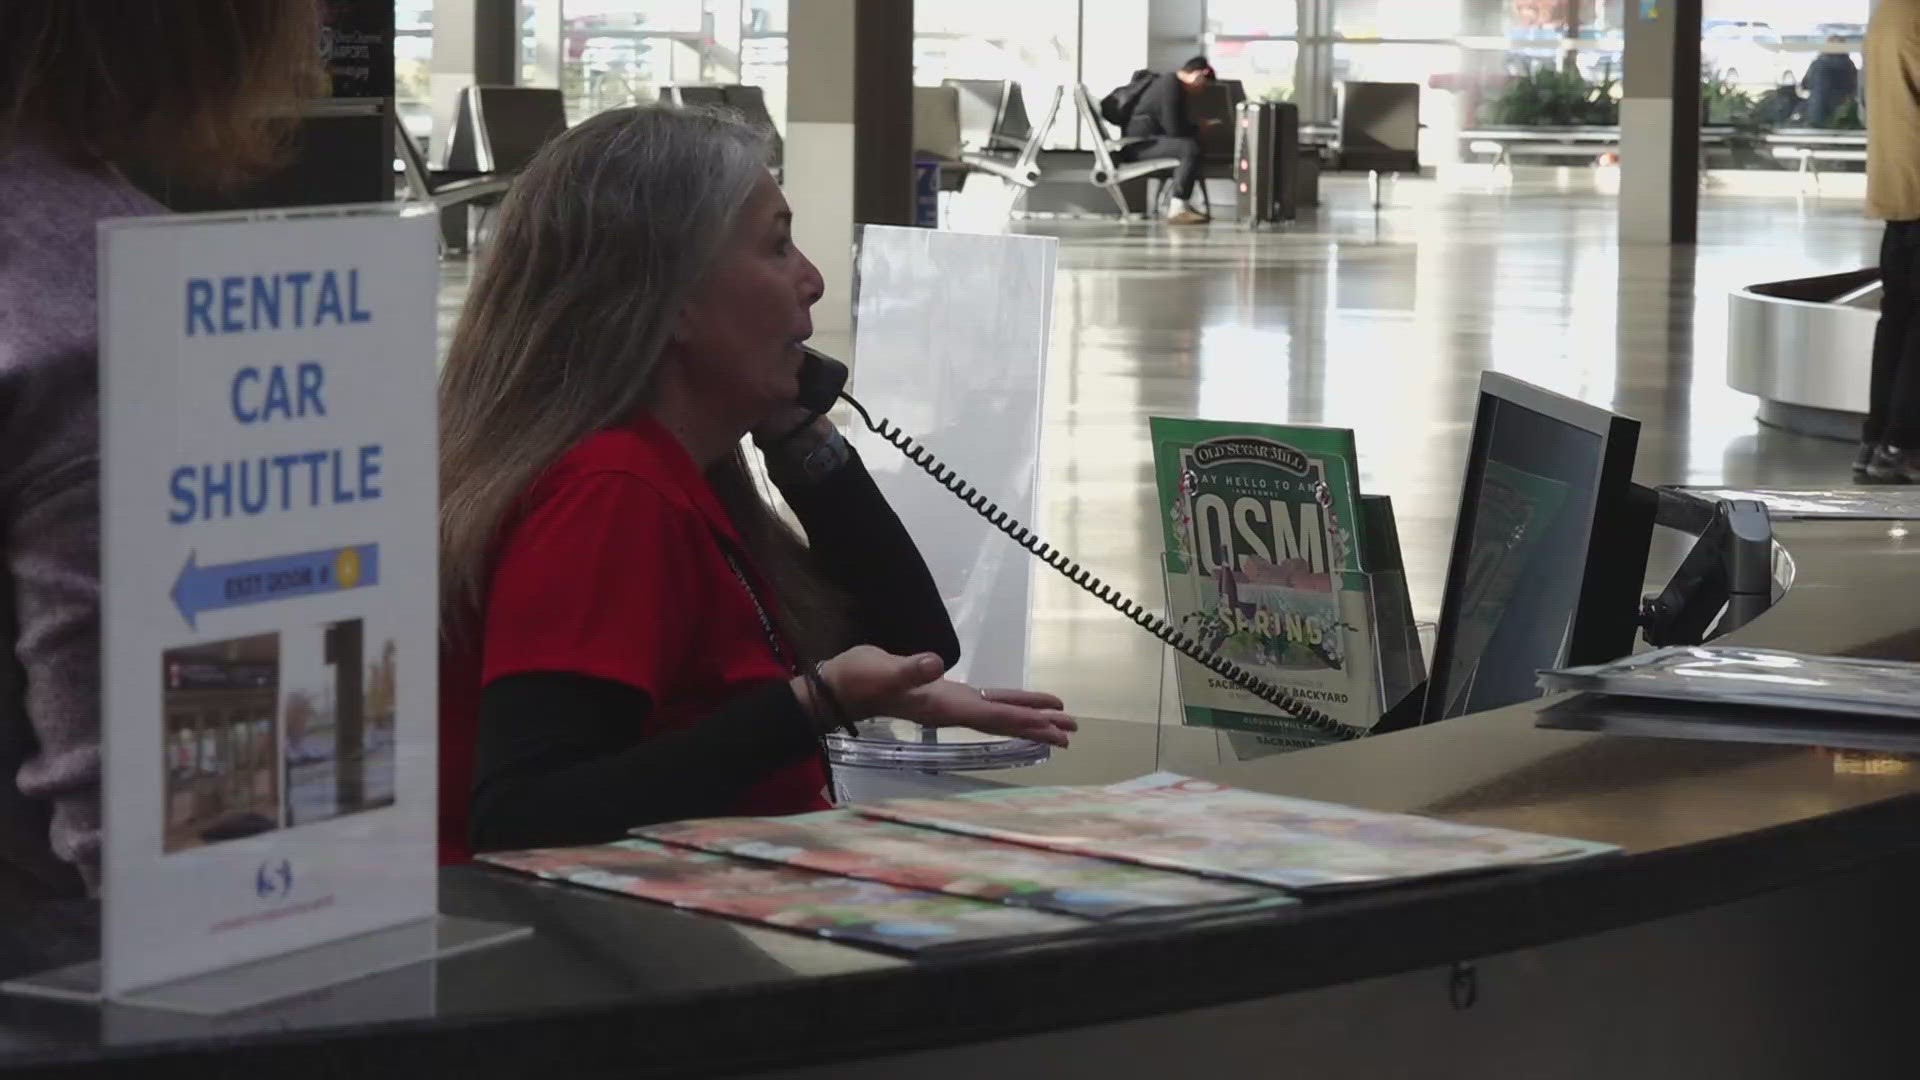 Meet one of the volunteers helping people at the Sacramento International Airport.